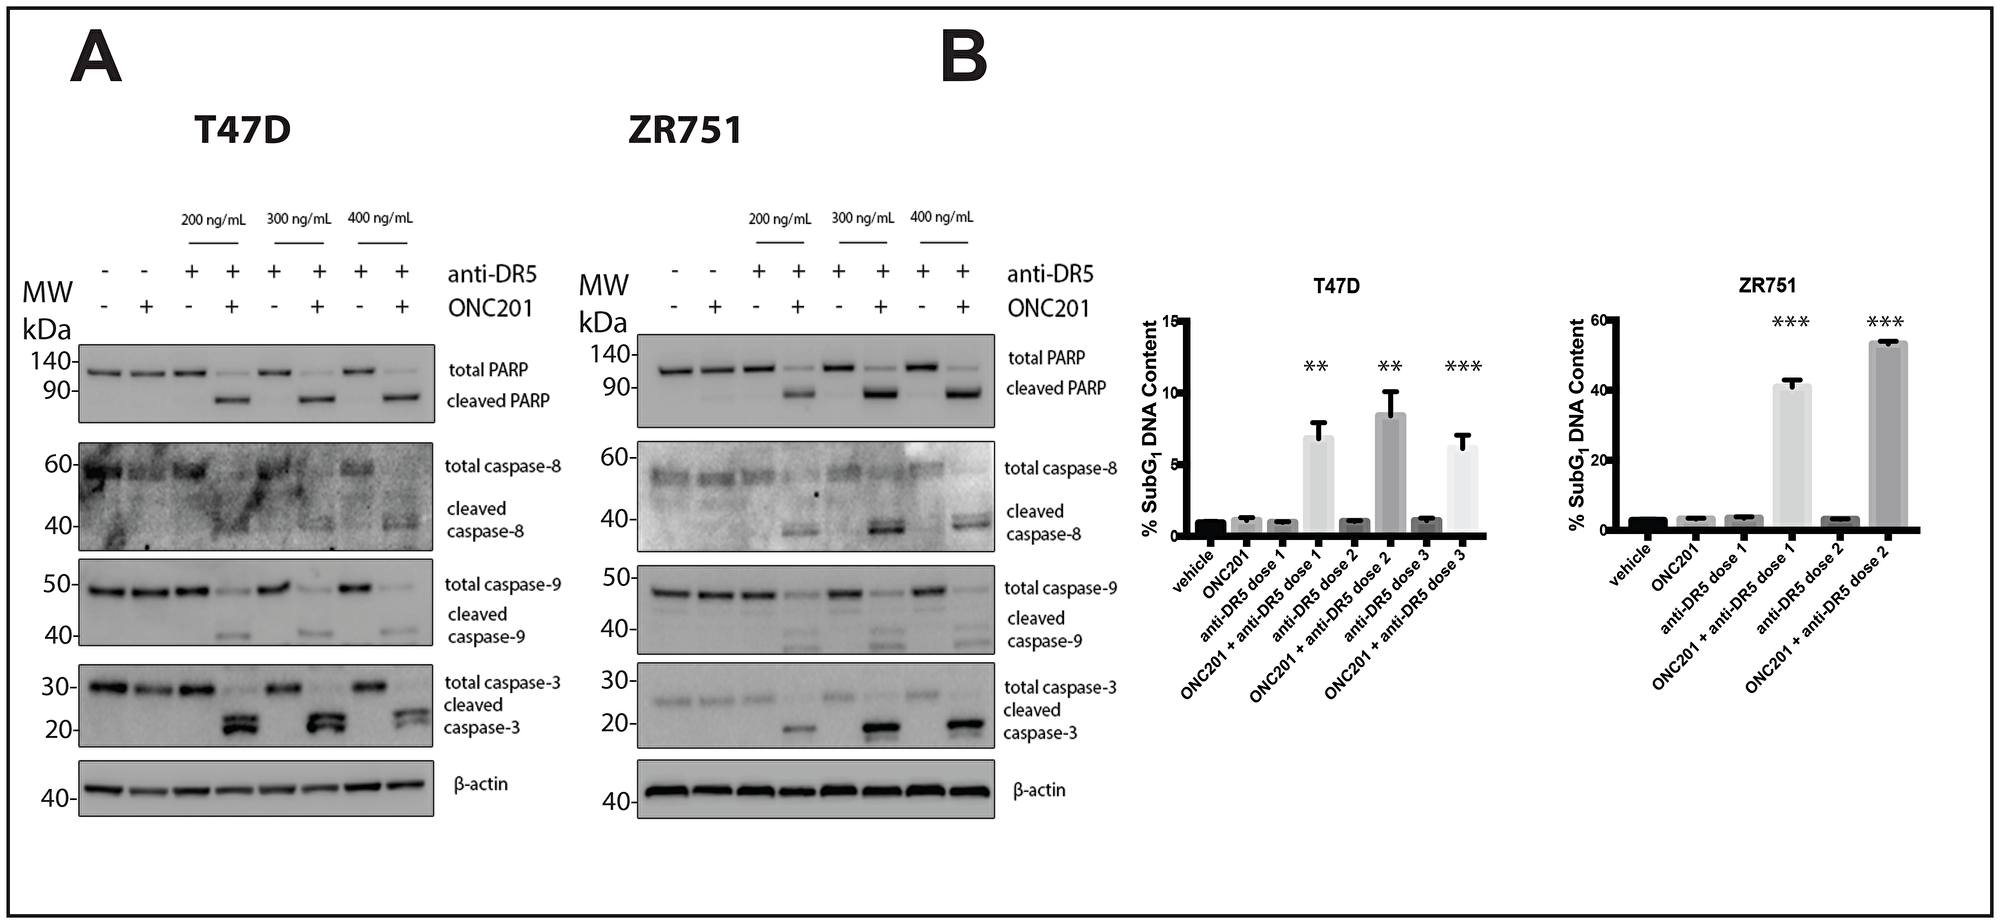 Figure 7: A DR5-agonistic antibody can also be used to convert the response of T47D and ZR751 breast cancer cells from anti-proliferative to pro-apoptotic.